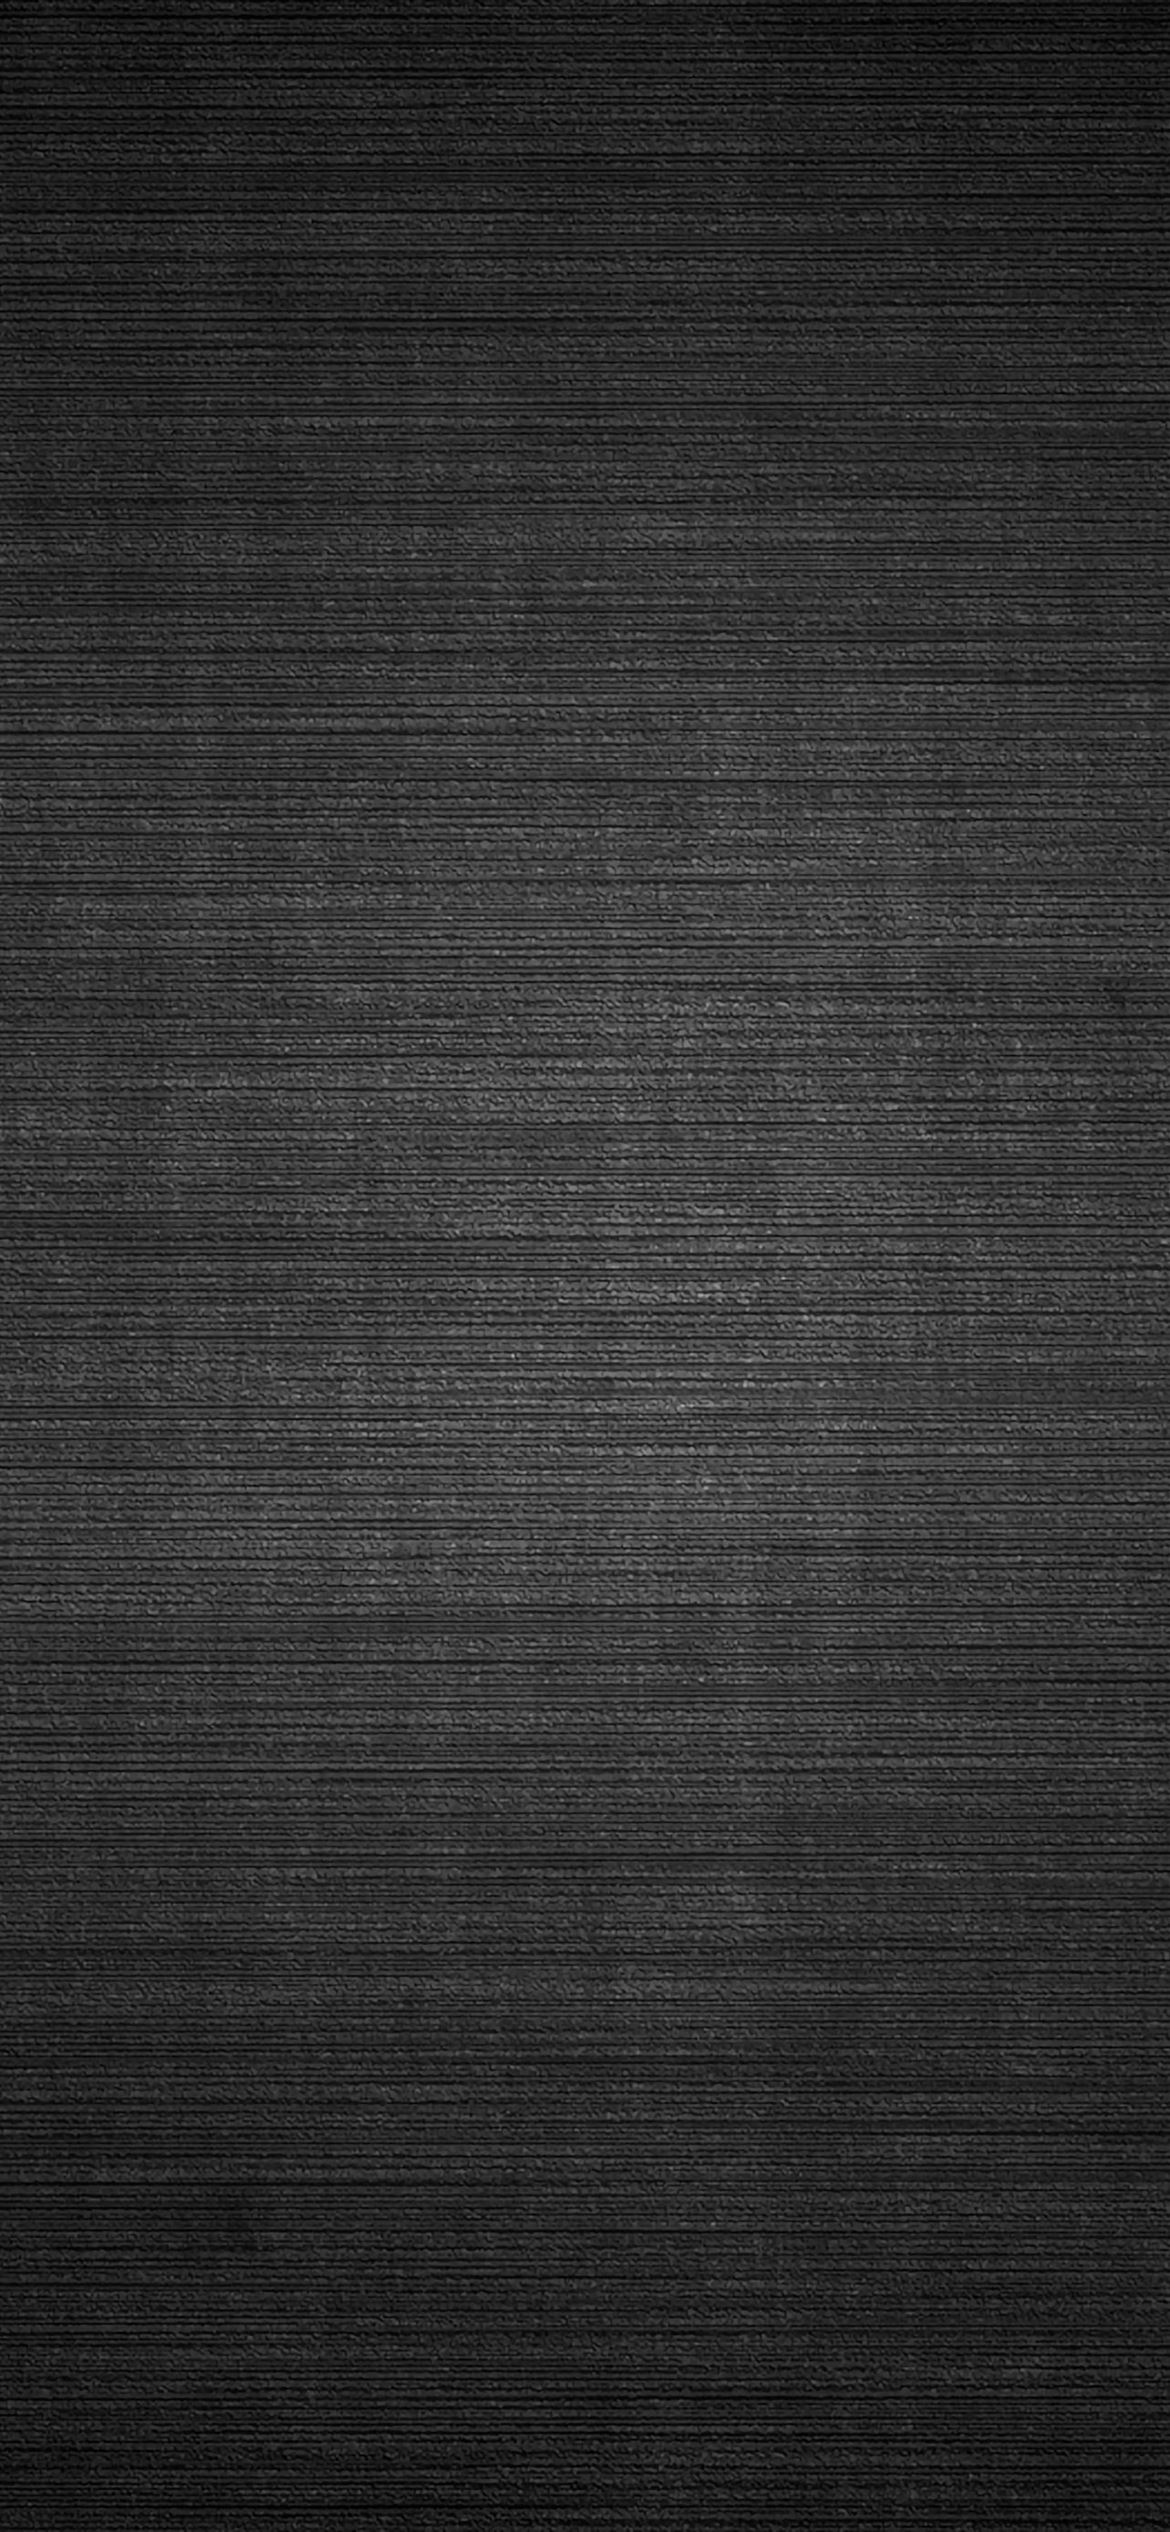 Abstract Gray Texture Background iPhone Wallpaper Free Download